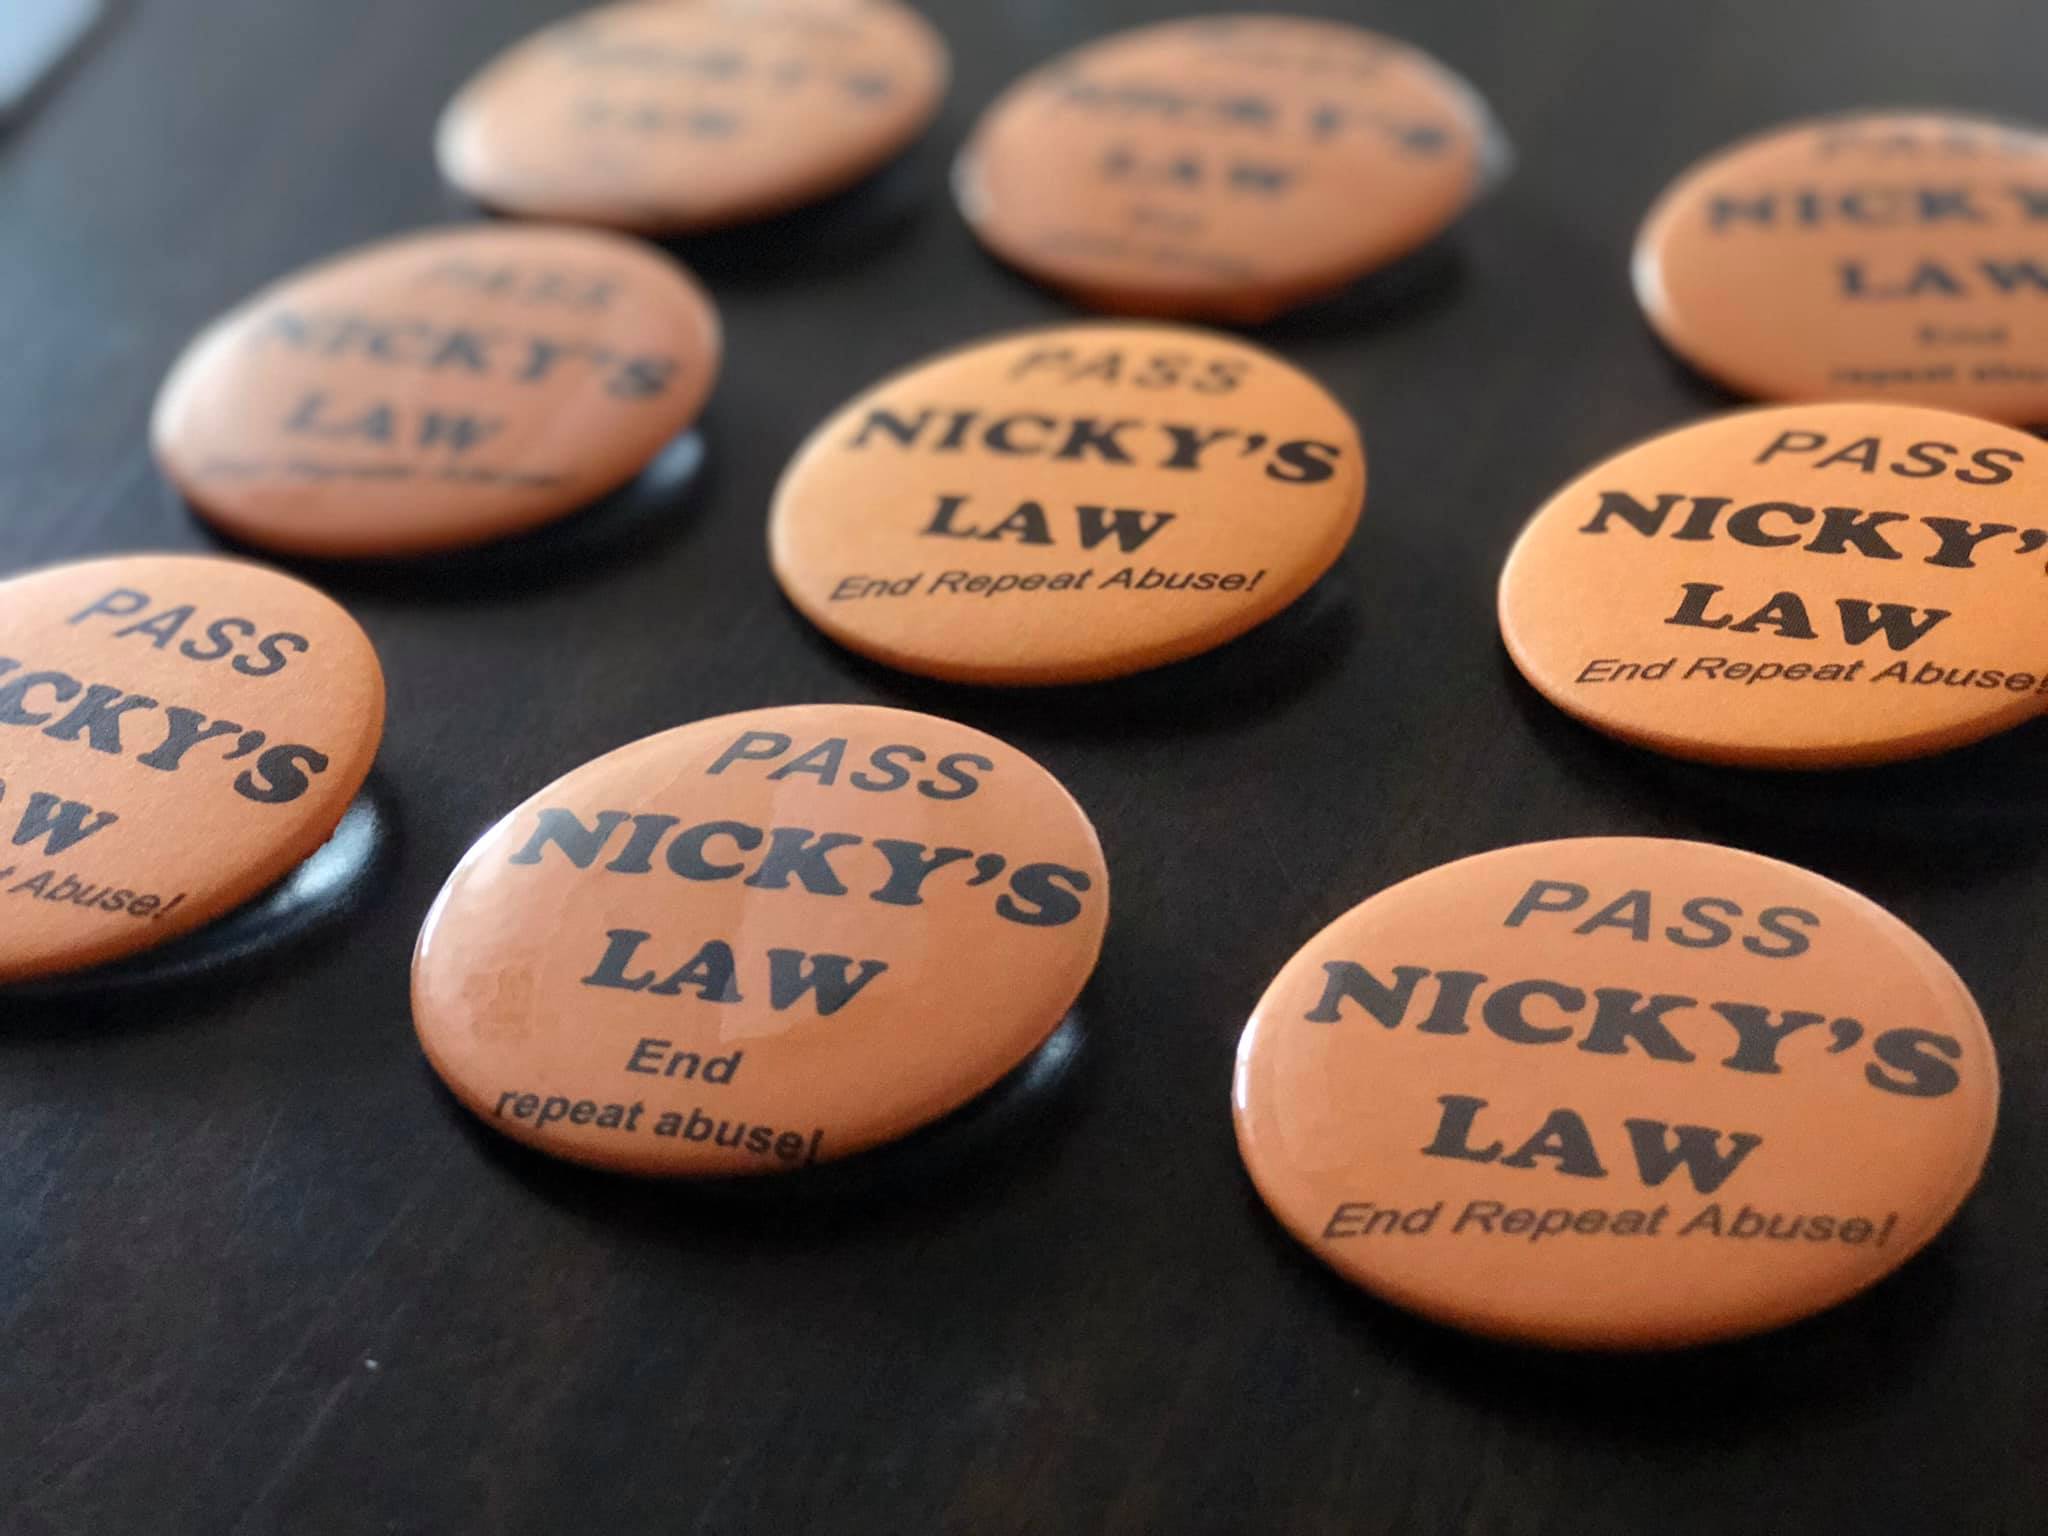 Nicky’s Law Passed